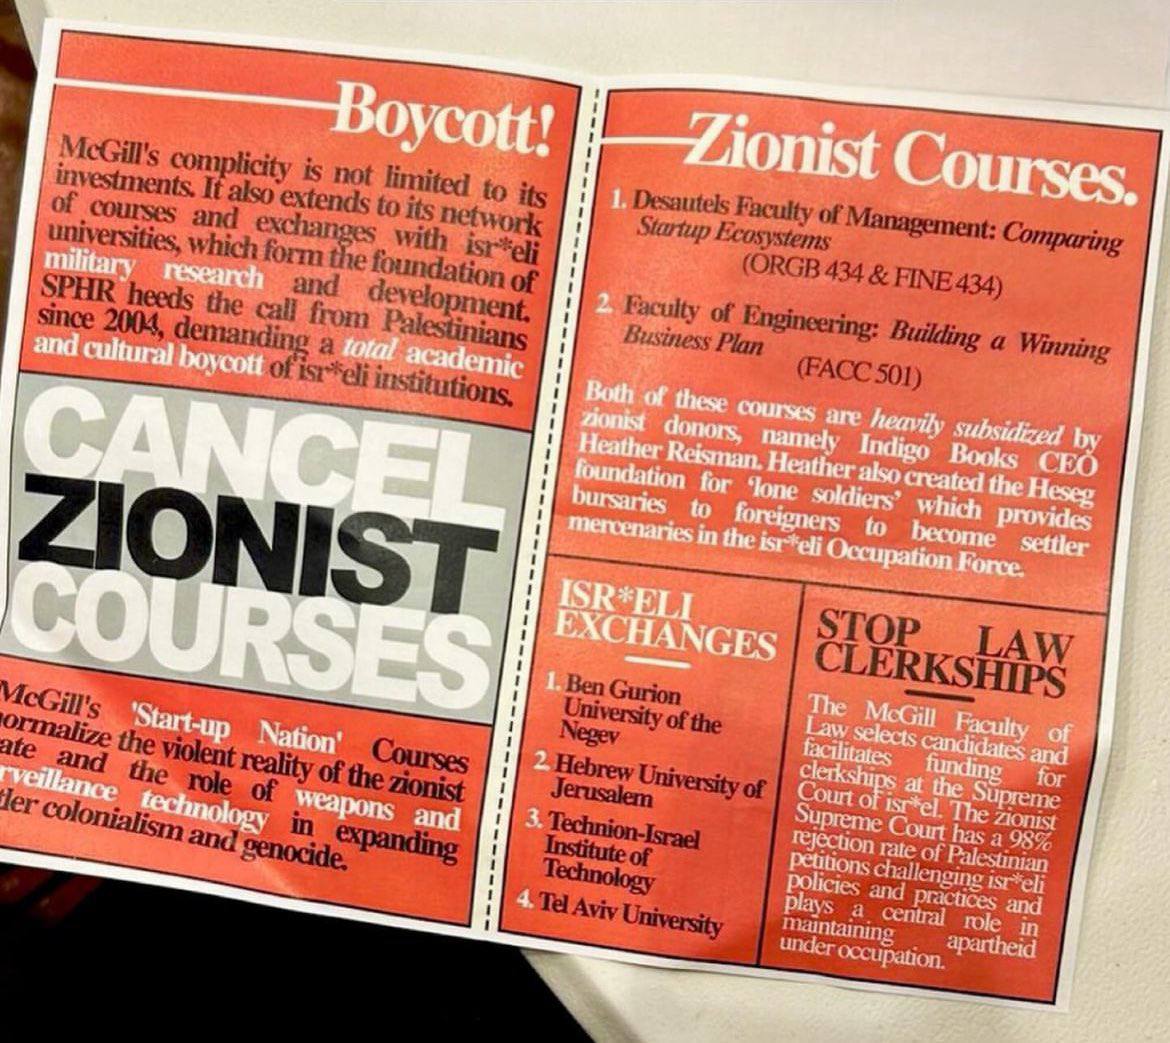 🇨🇦 is being Islamisized!
This is BAD 4 🇨🇦🇨🇦🇨🇦
What is happening to Canada?
Flyers are being distributed in McGill University in Montreal, instructing students to boycott courses and programs affiliated with Israel - and let’s be honest, we know they mean Jews.